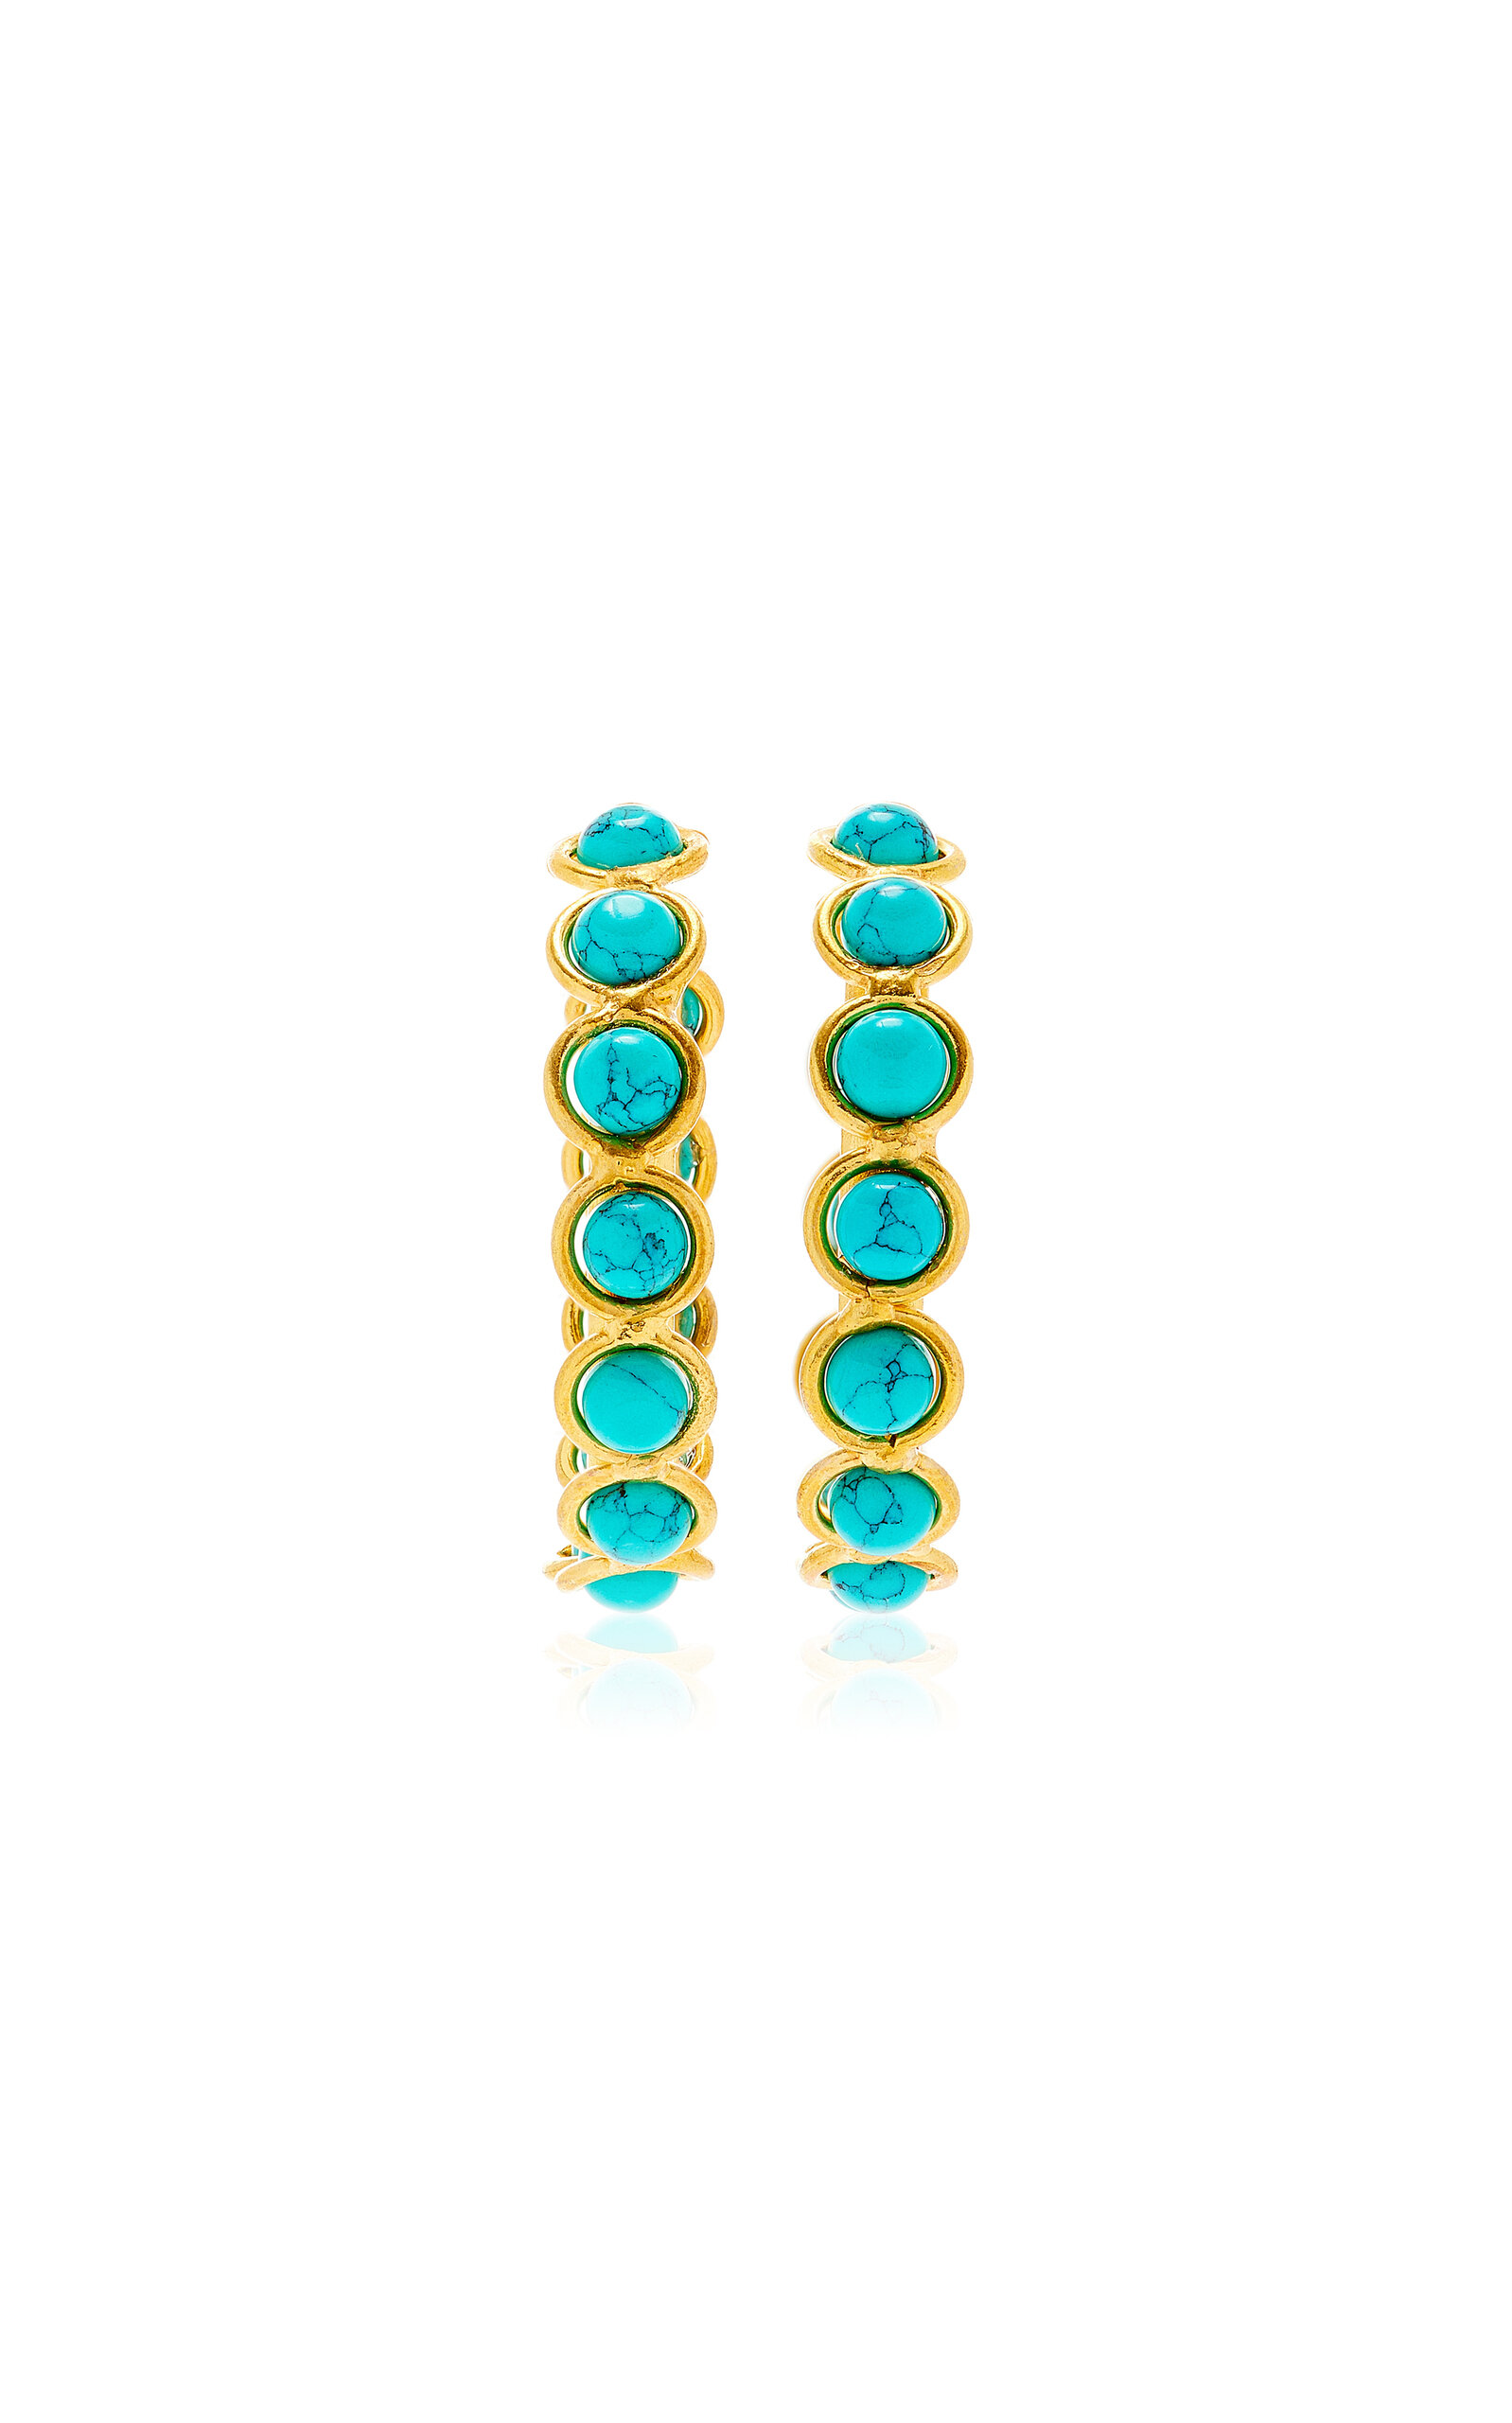 Candies 22K Gold-Plated Turquoise Earrings